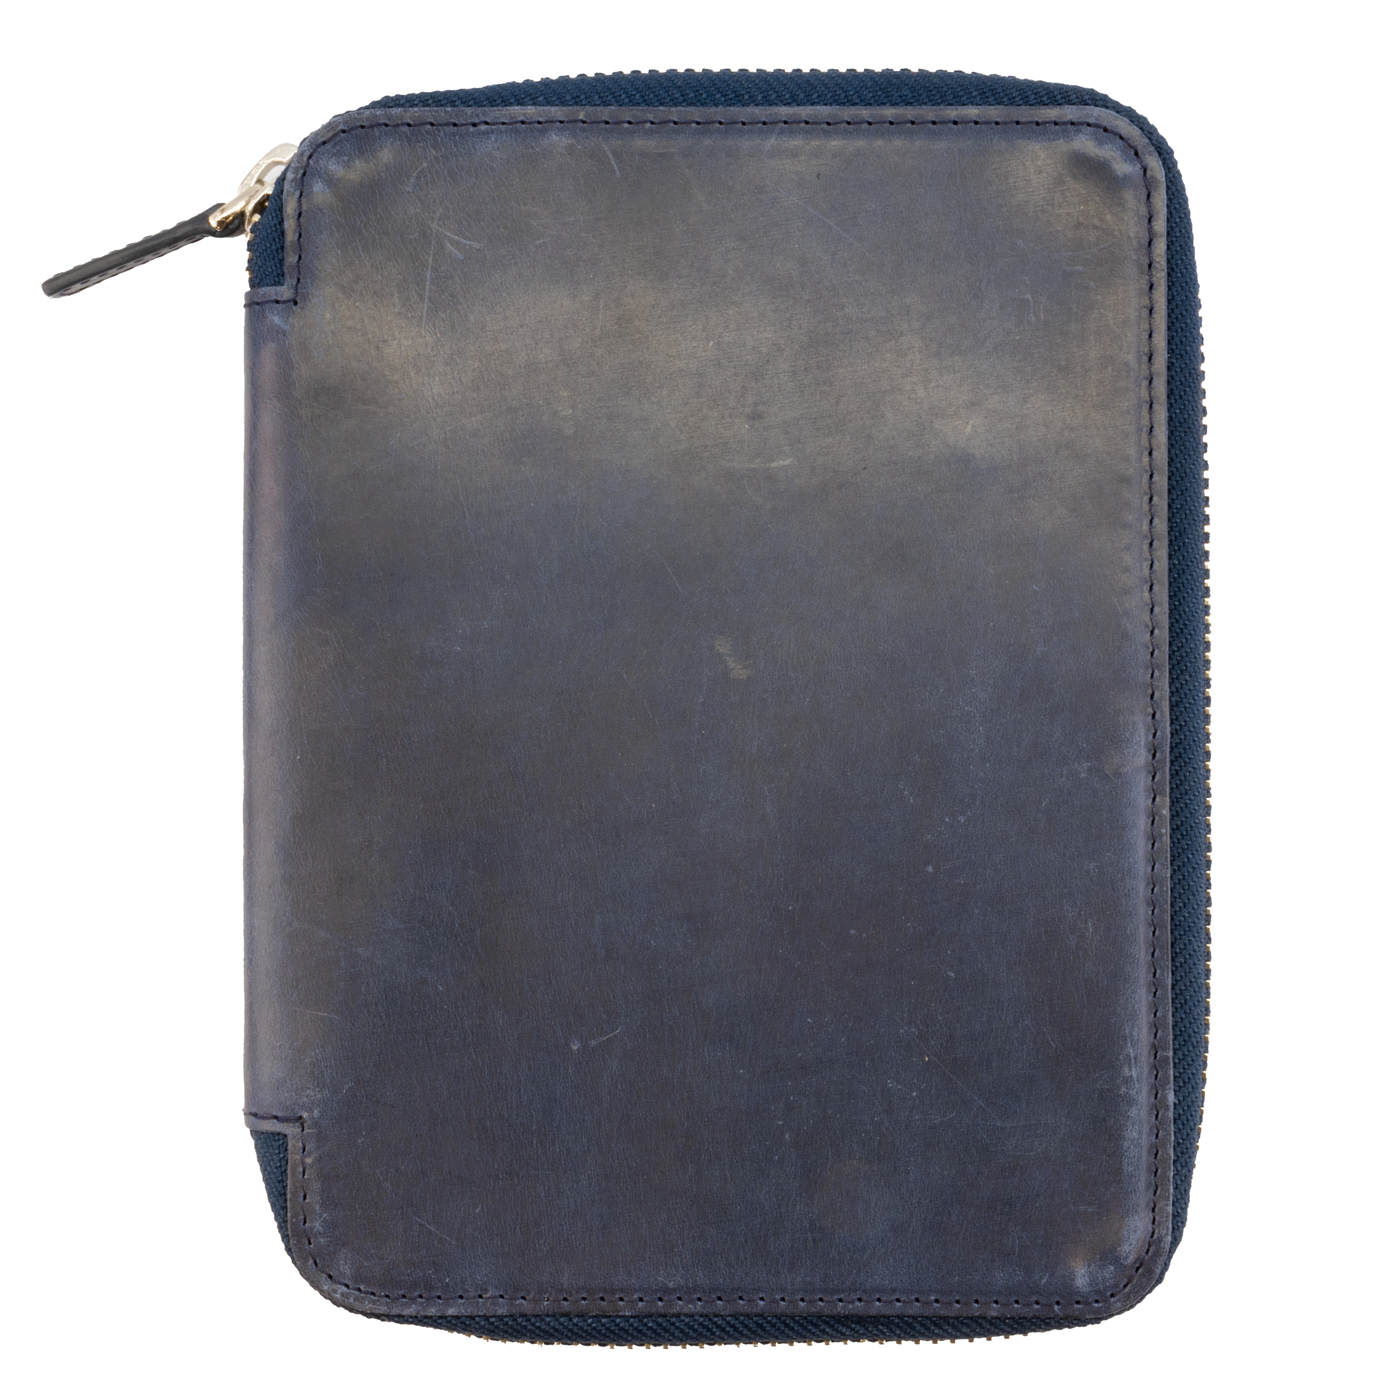 Galen Leather Co. Zippered B6 Notebook Folio- Crazy Horse Navy Blue